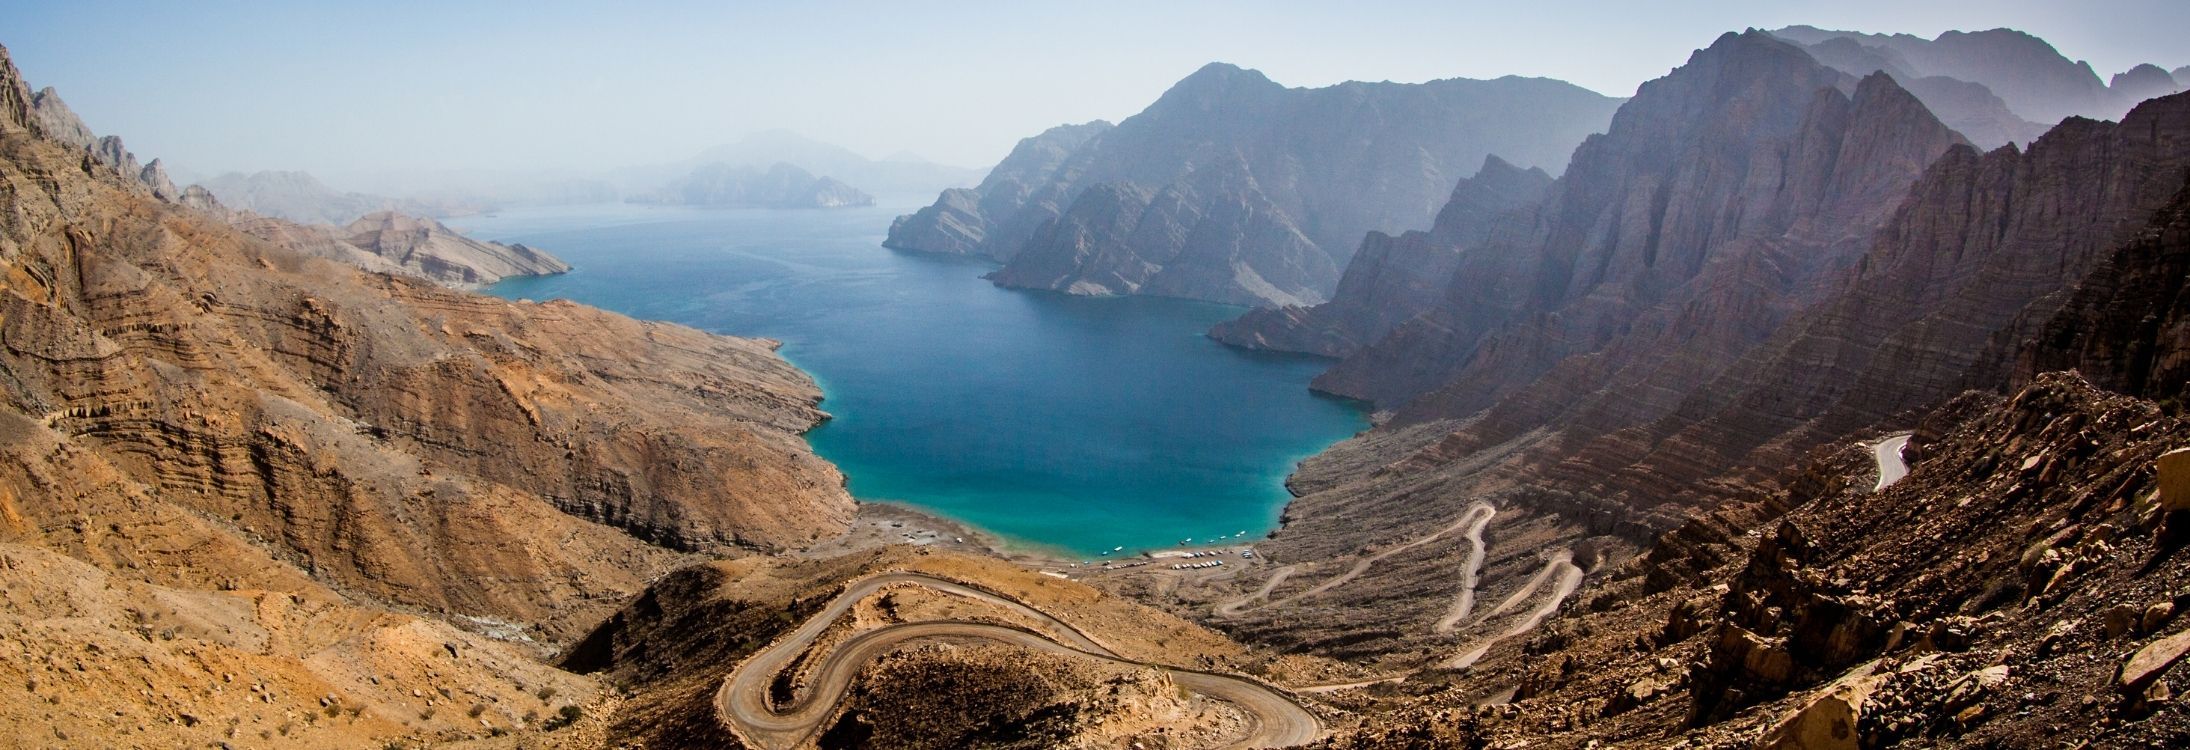 10 reasons why you'll want to take that Musandam trip right away